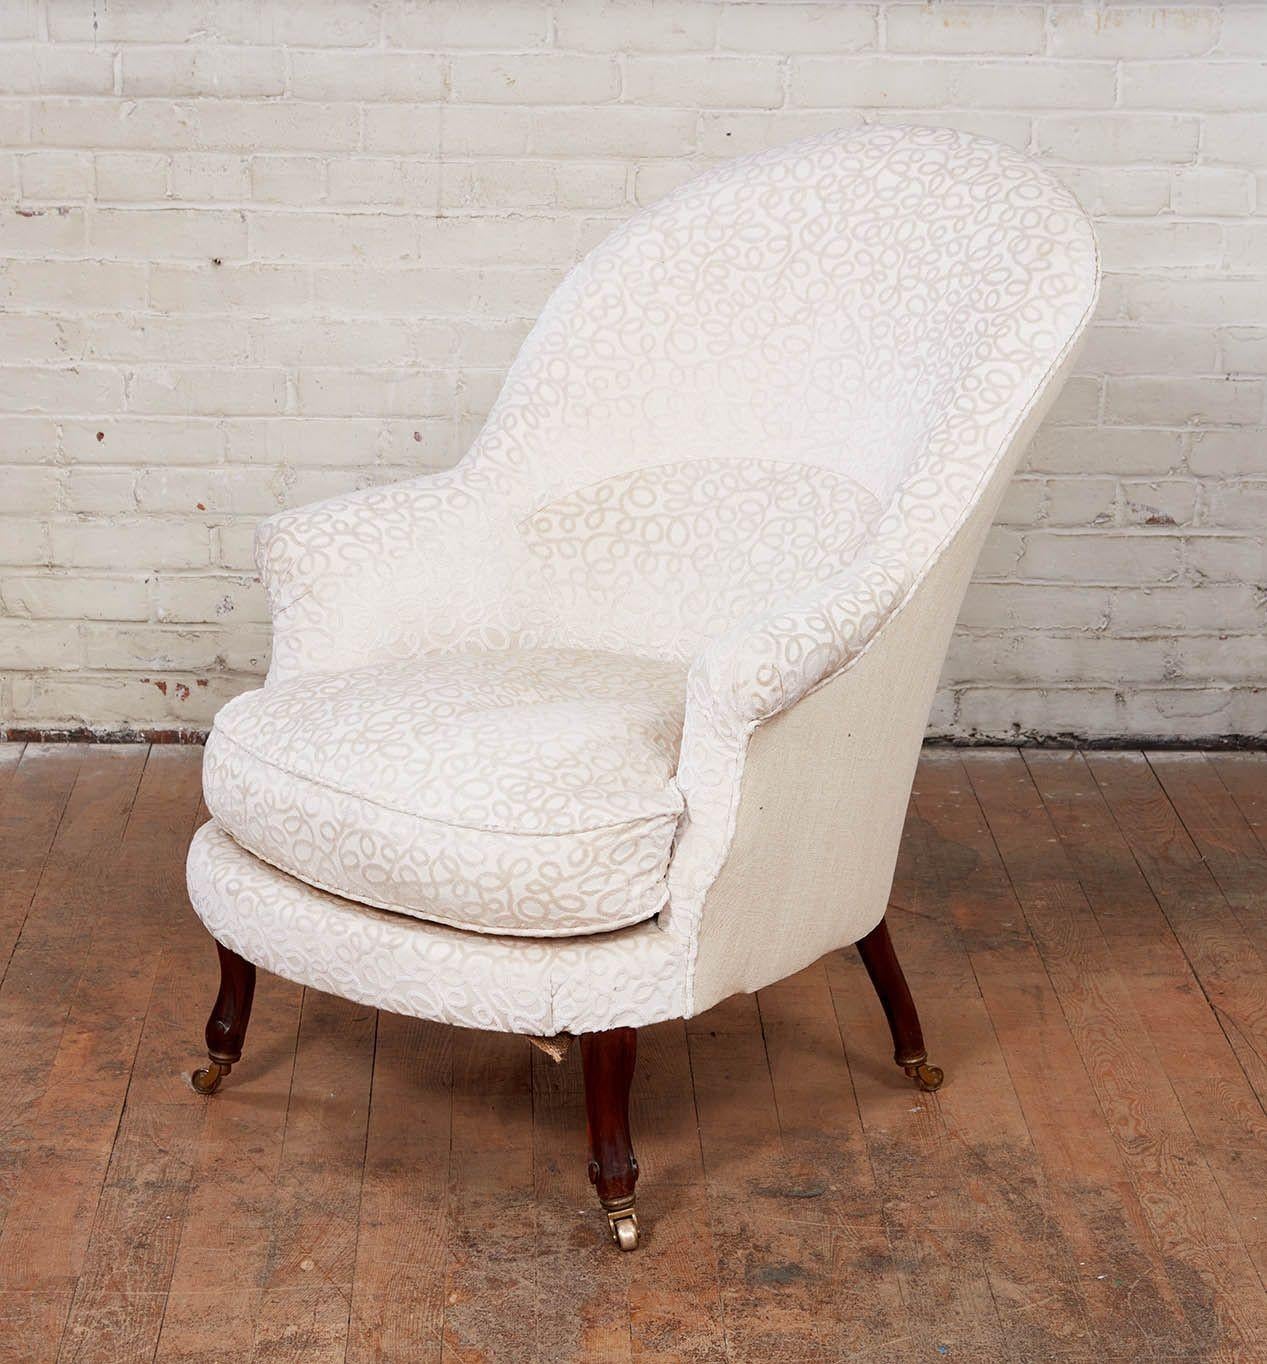 Pair of Upholstered Art Nouveau Slipper Chairs In Good Condition For Sale In Greenwich, CT